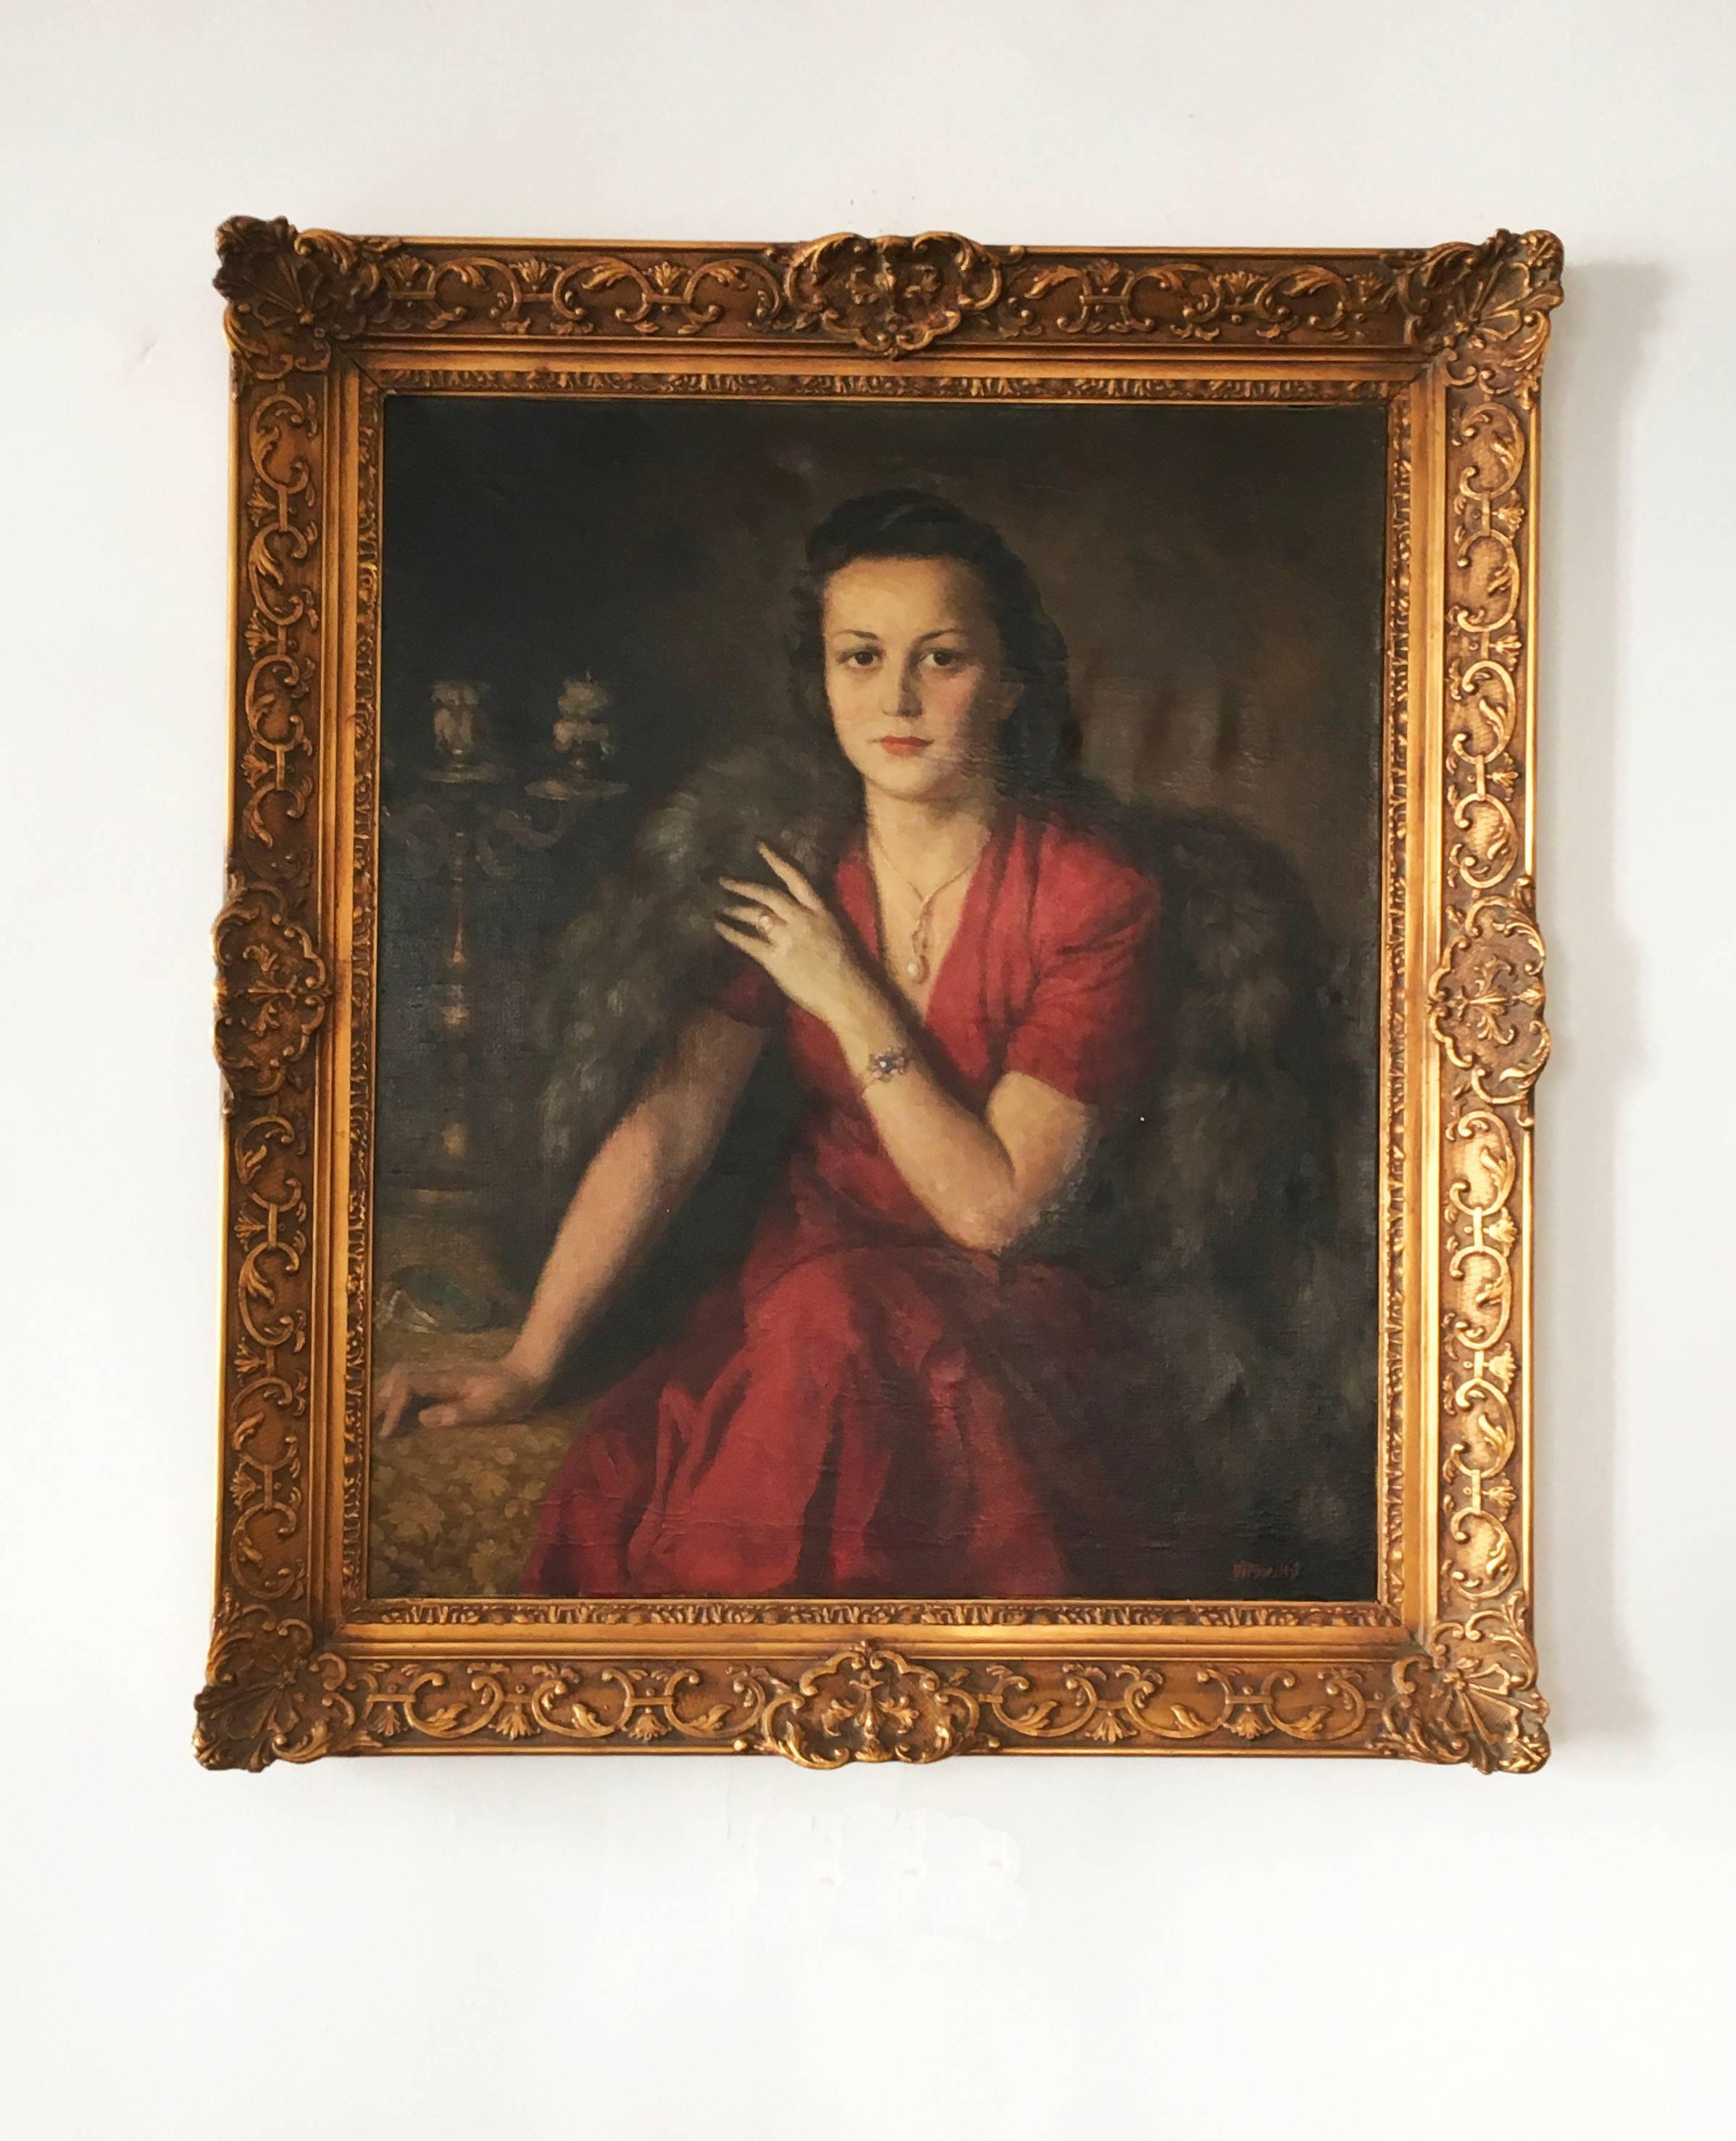 Oil on canvas, wooden frame form about 1938-1939.
Good original condition.
Dimensions painting only:  95x79cm